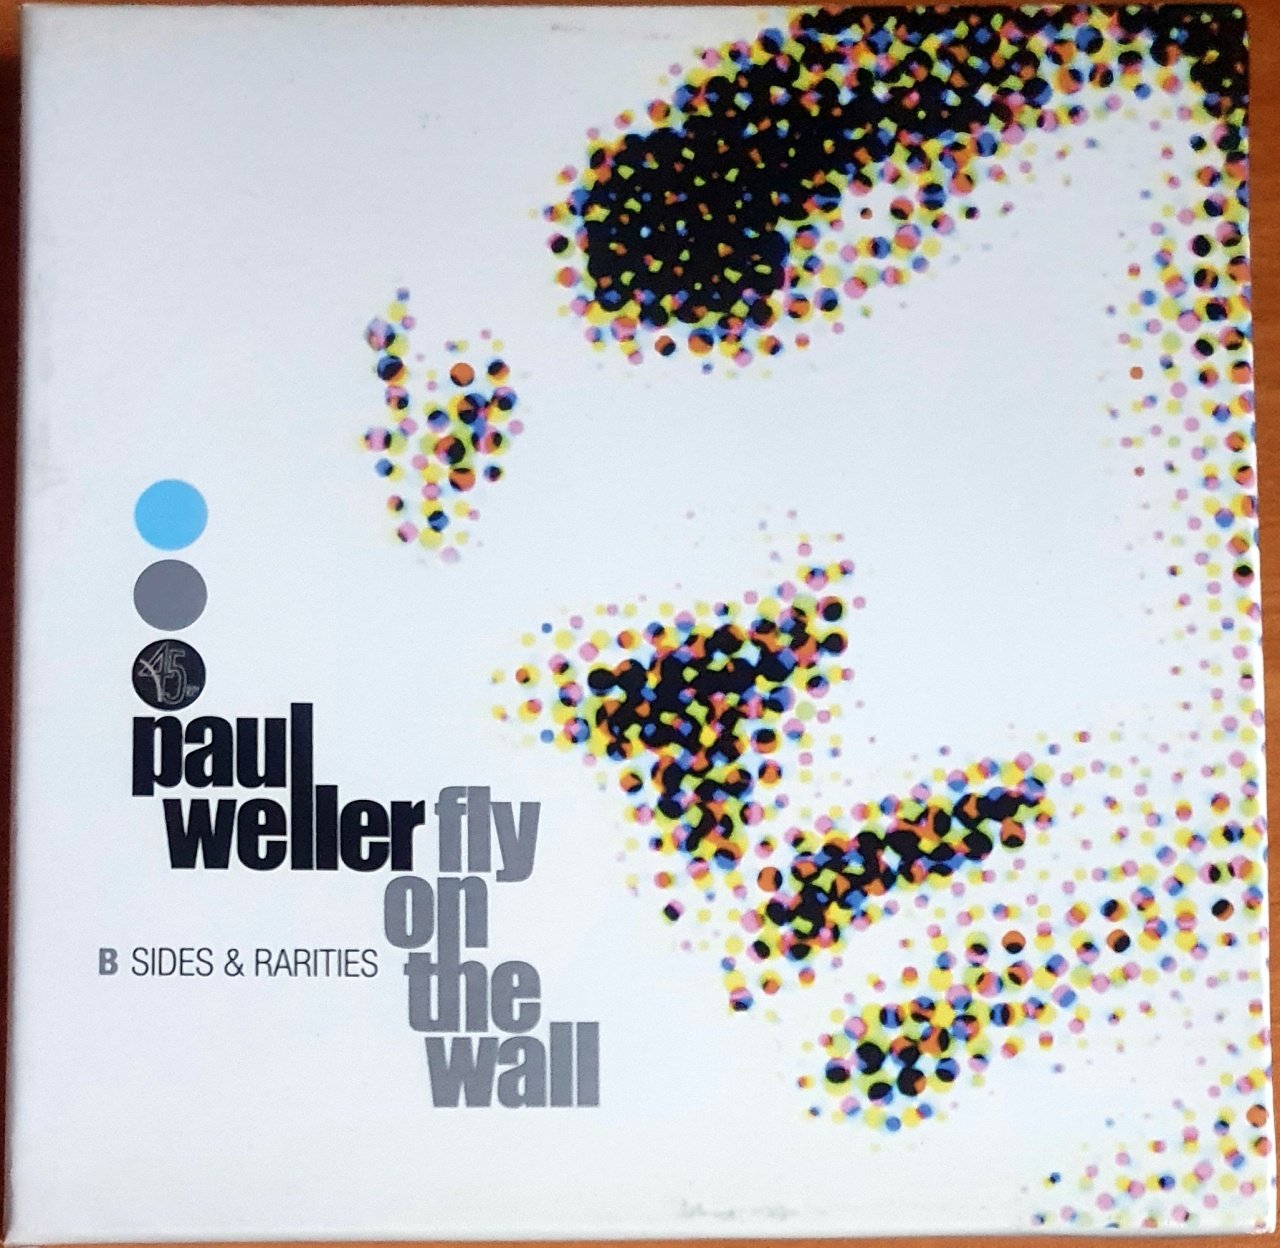 PAUL WELLER - FLY ON THE WALL / B SIDES & RARITIES (2003) - 3CD REMASTERED BOX SET 2.EL